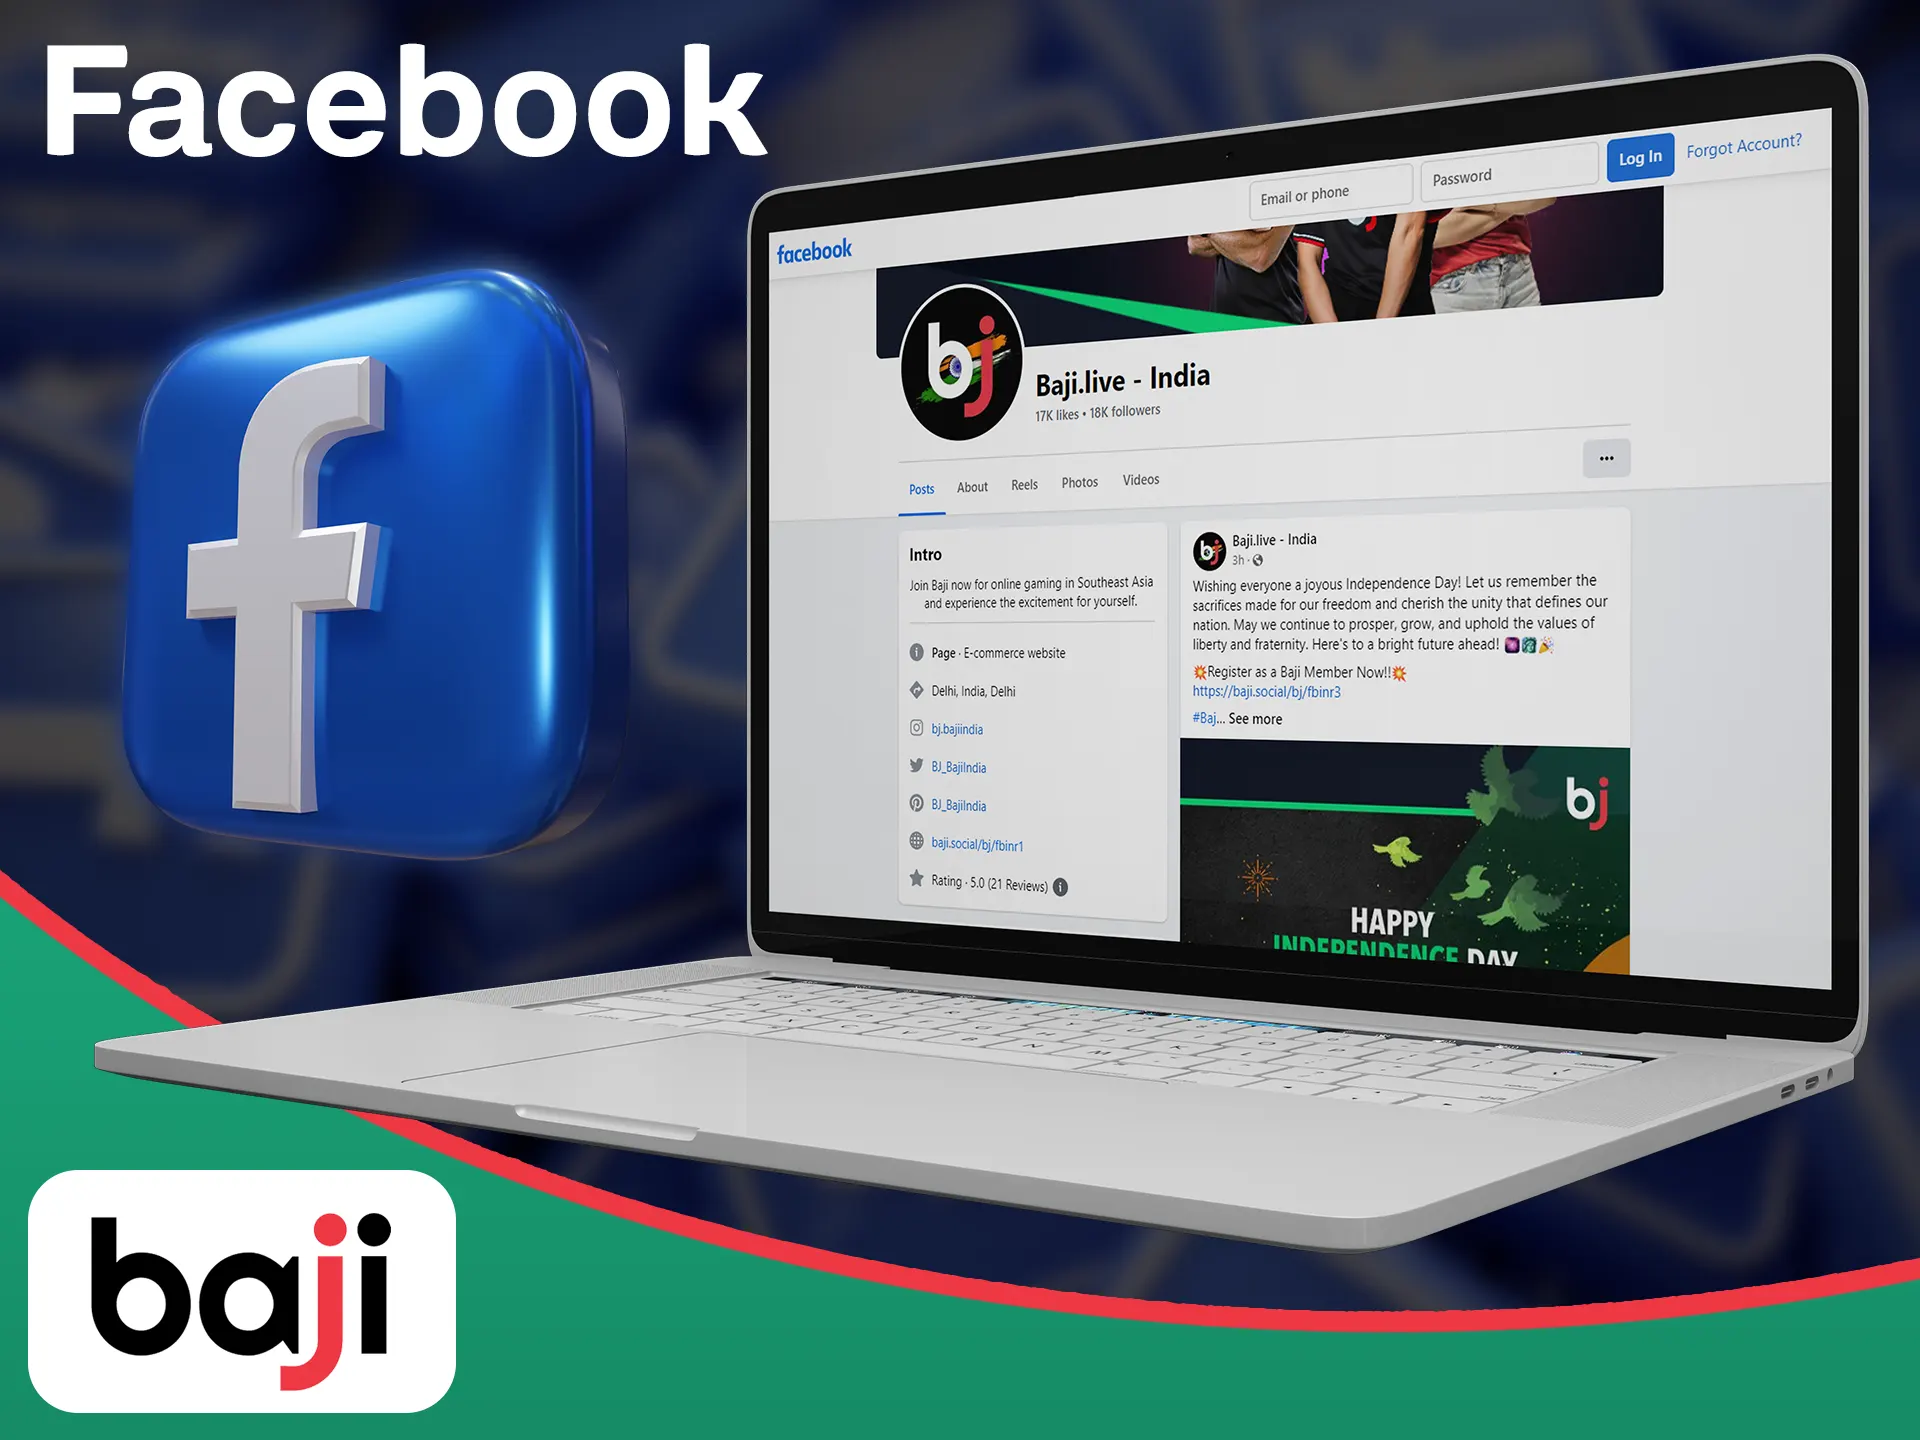 Send message to Baji using the official Facebook account.